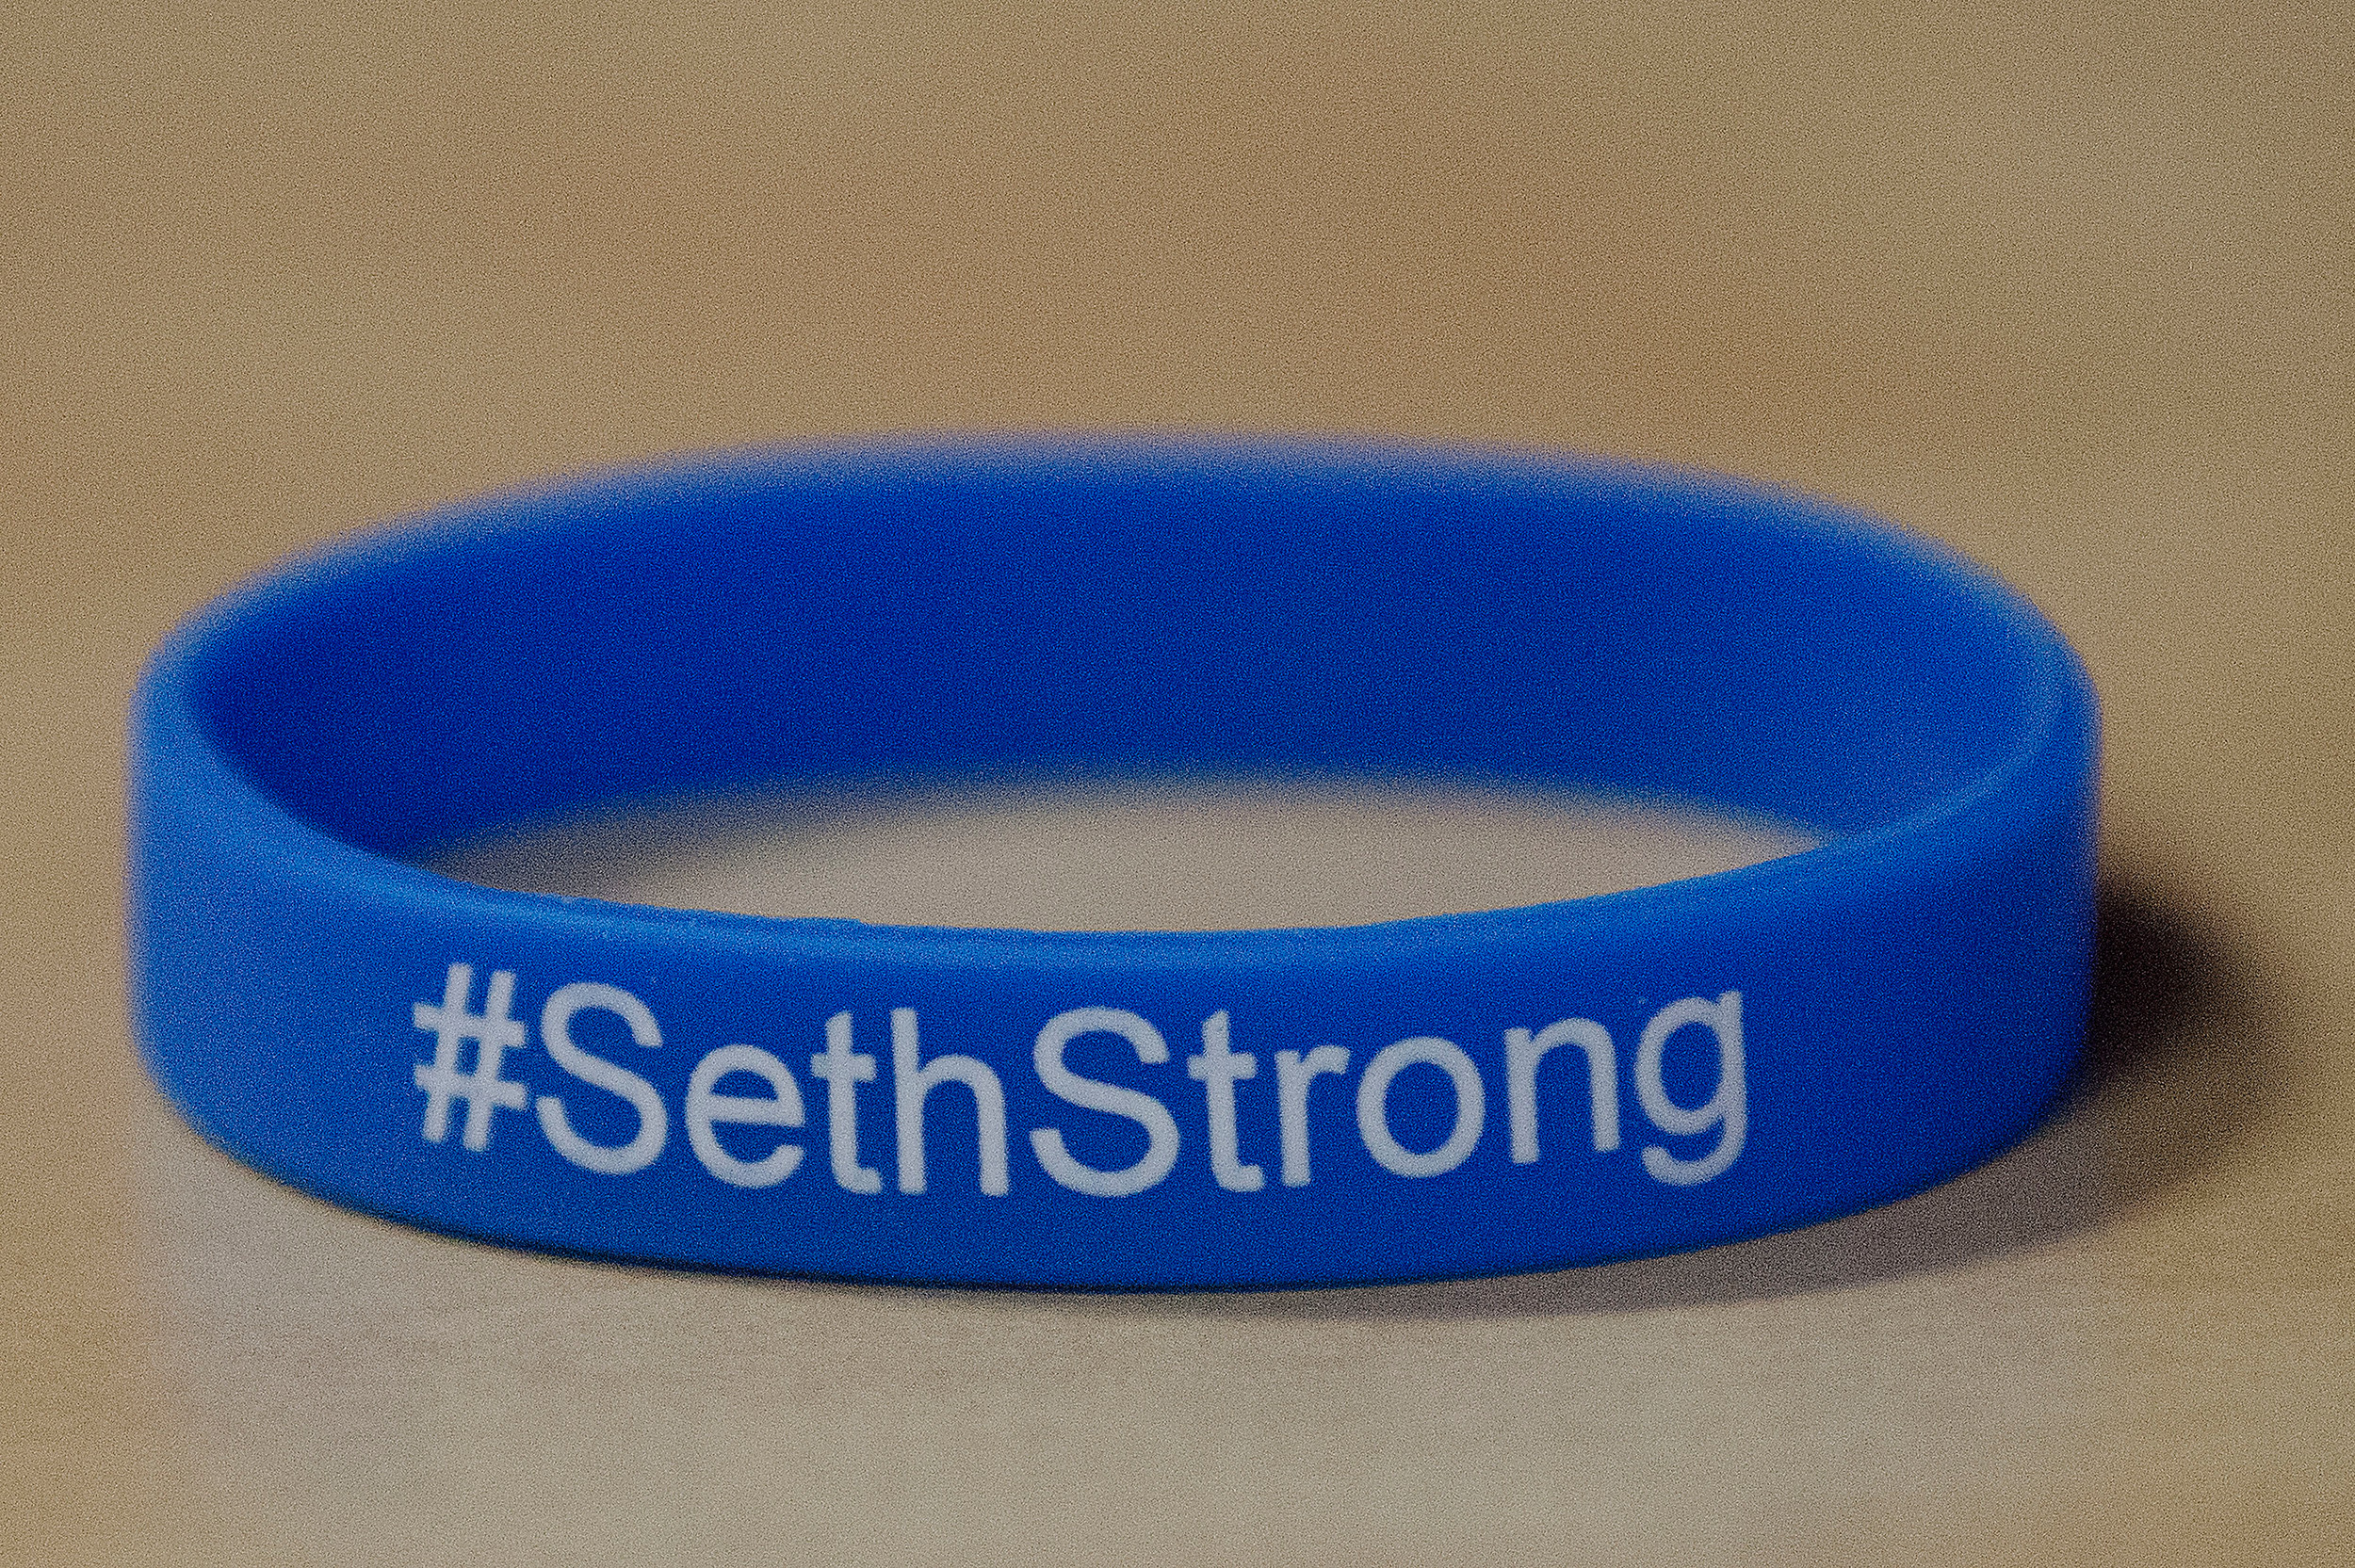 All proceeds from the sale of #SethStrong bracelets go to Rhode Island Special Olympics, in Seth Dame's honor.